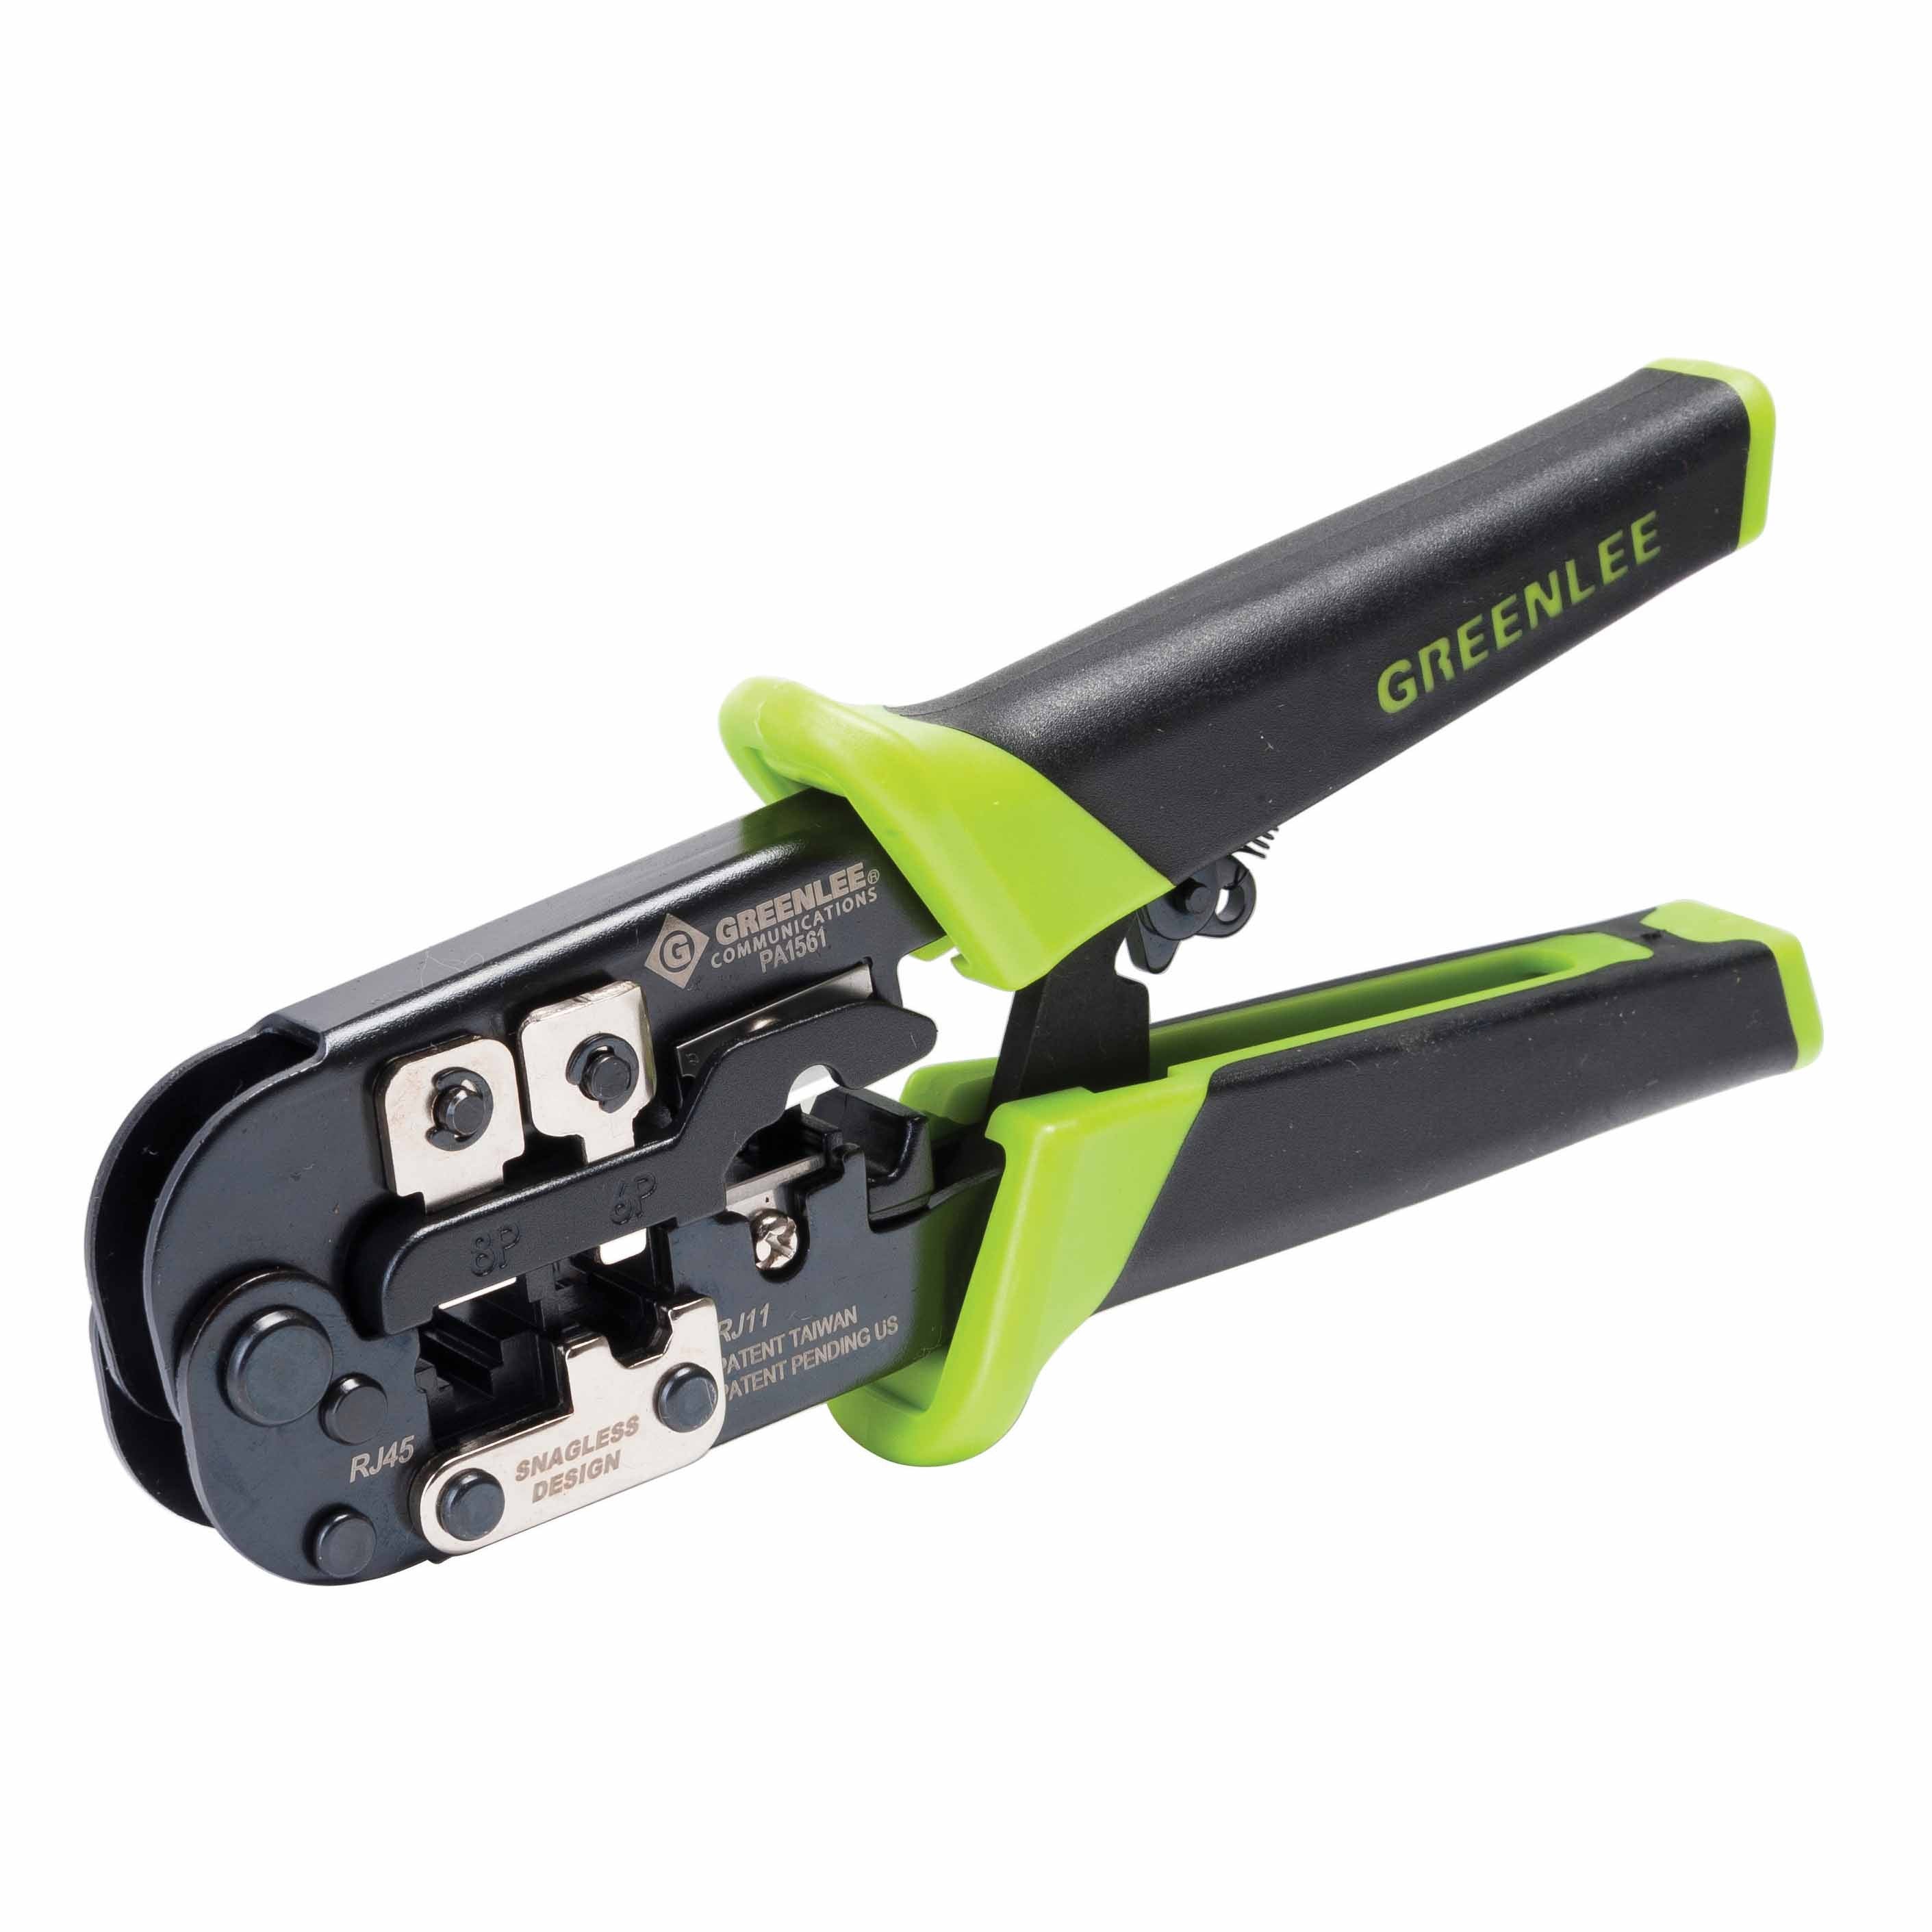 Greenlee PA1561 Snagless All-In-On Crimper